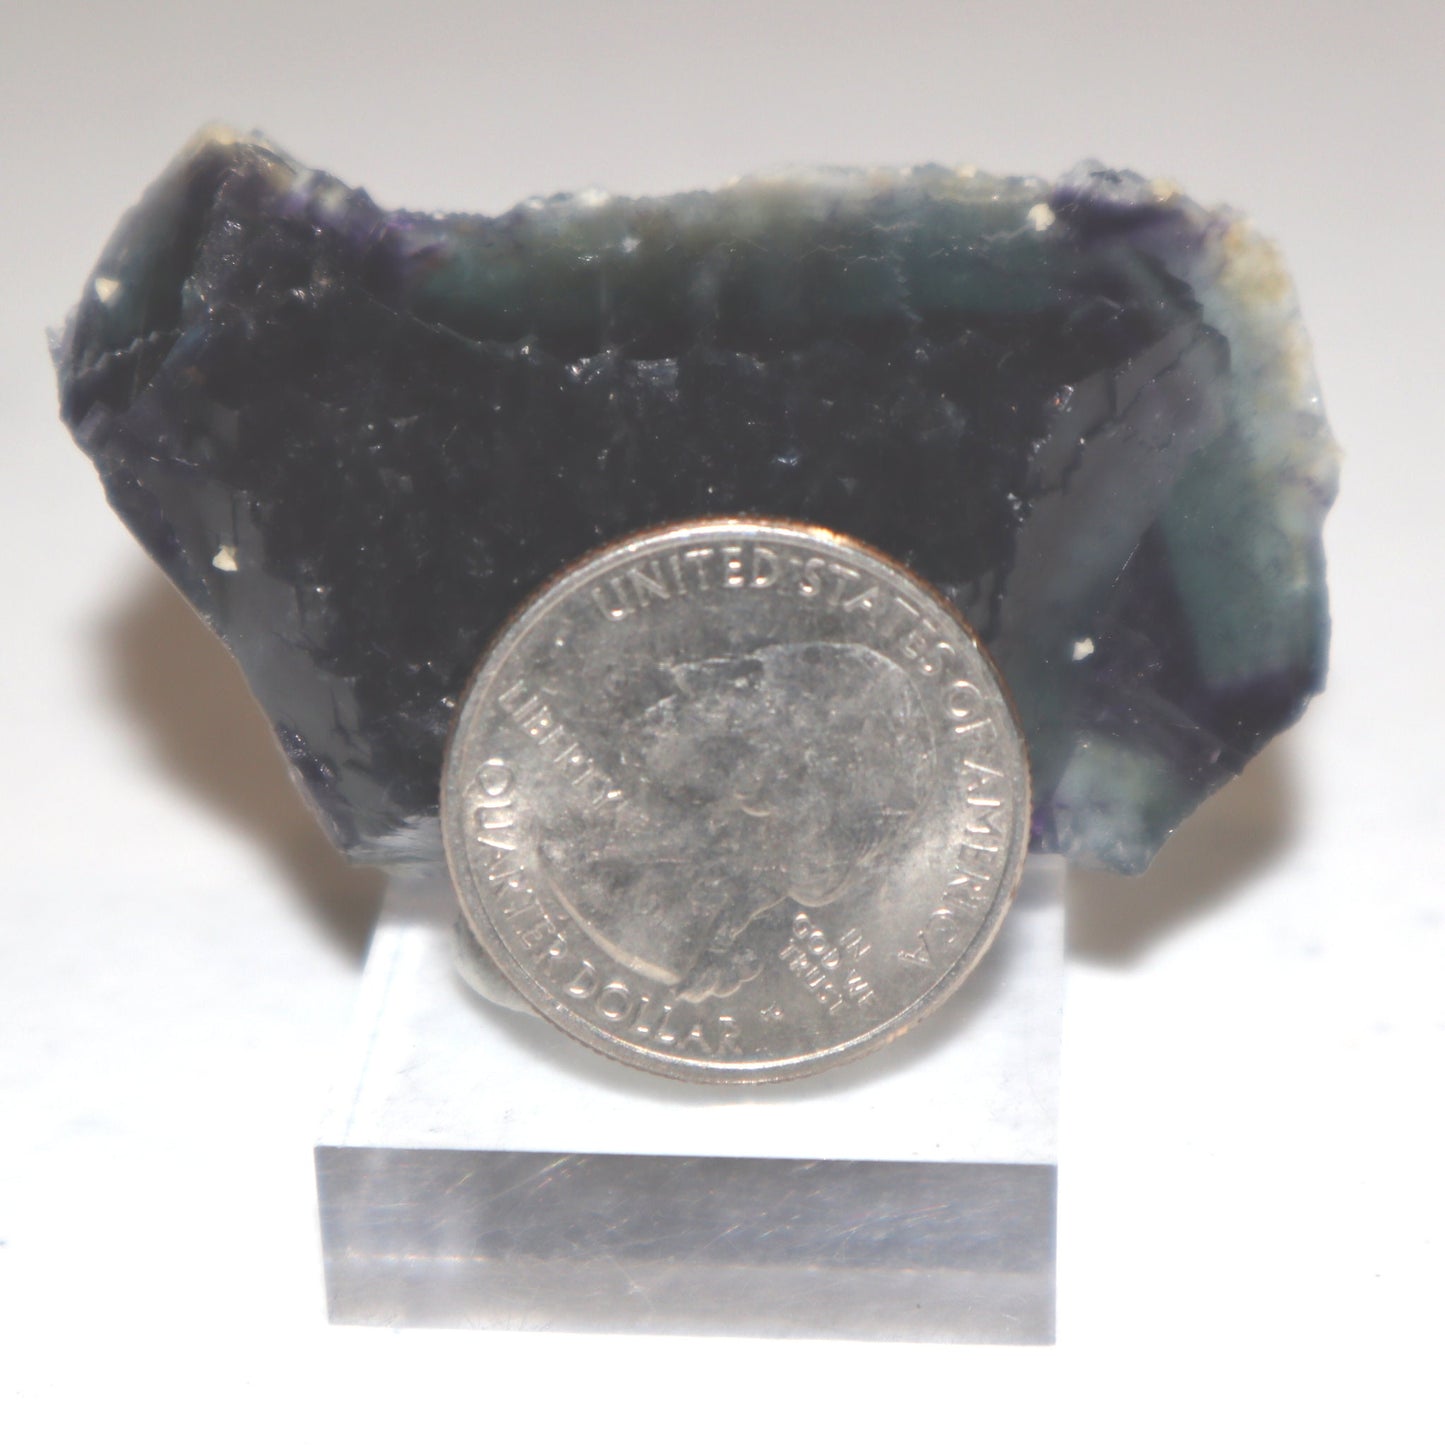 Inner Mongolia Rainbow Fluorite Specimen, Purple and Blue Fluorite Cubed, Huanggangliang Mine, High Quality Fluorite, Color-Zoned Fluorite